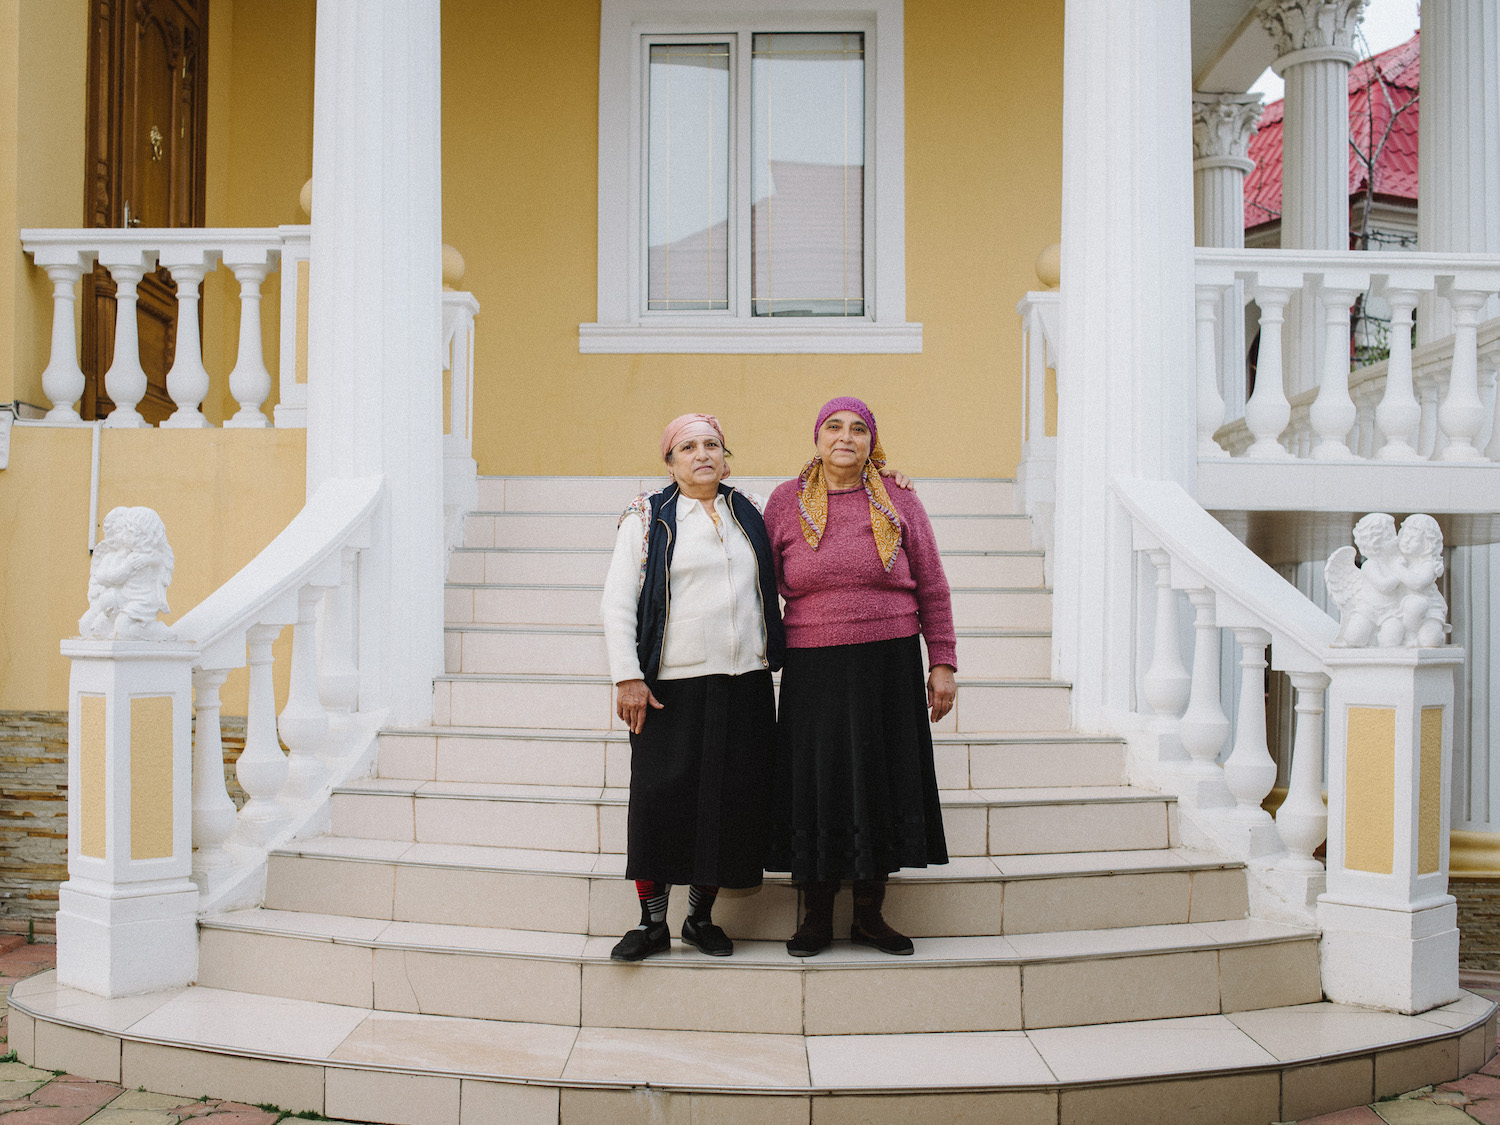 Judge Pătrunjel's (third) wife, Tatiana, and her sister, Maria, living in the same house